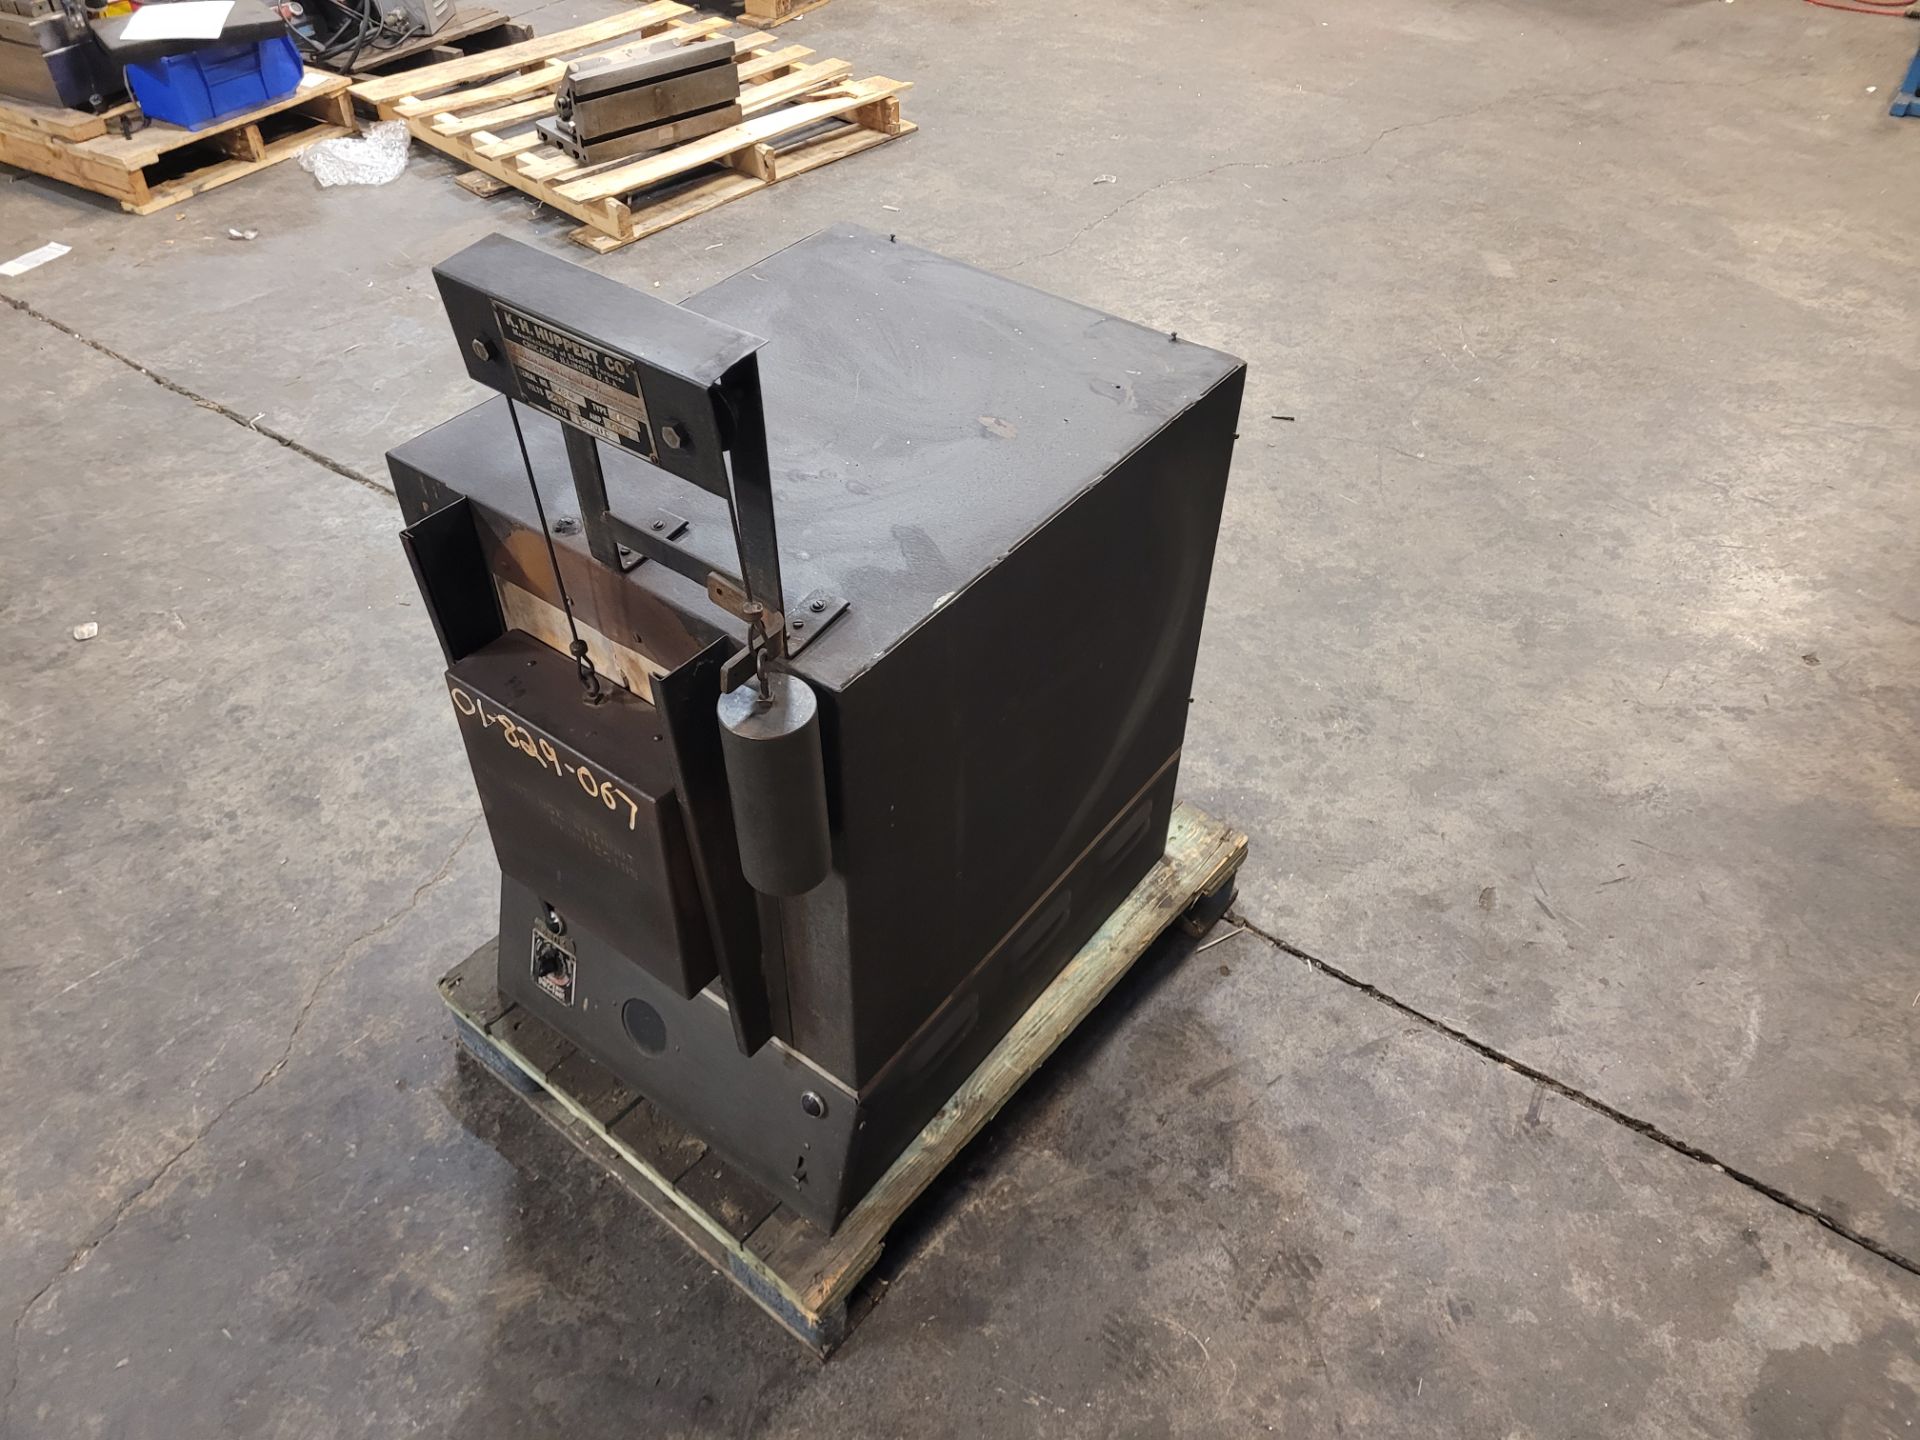 K. H. HUPPERT CO. ELECTRIC FURNACE VOLTS: 440 SPH. AMP: 6 KW, STYLE: 12BMIF, TYPE: ST. (Packing & - Image 2 of 8